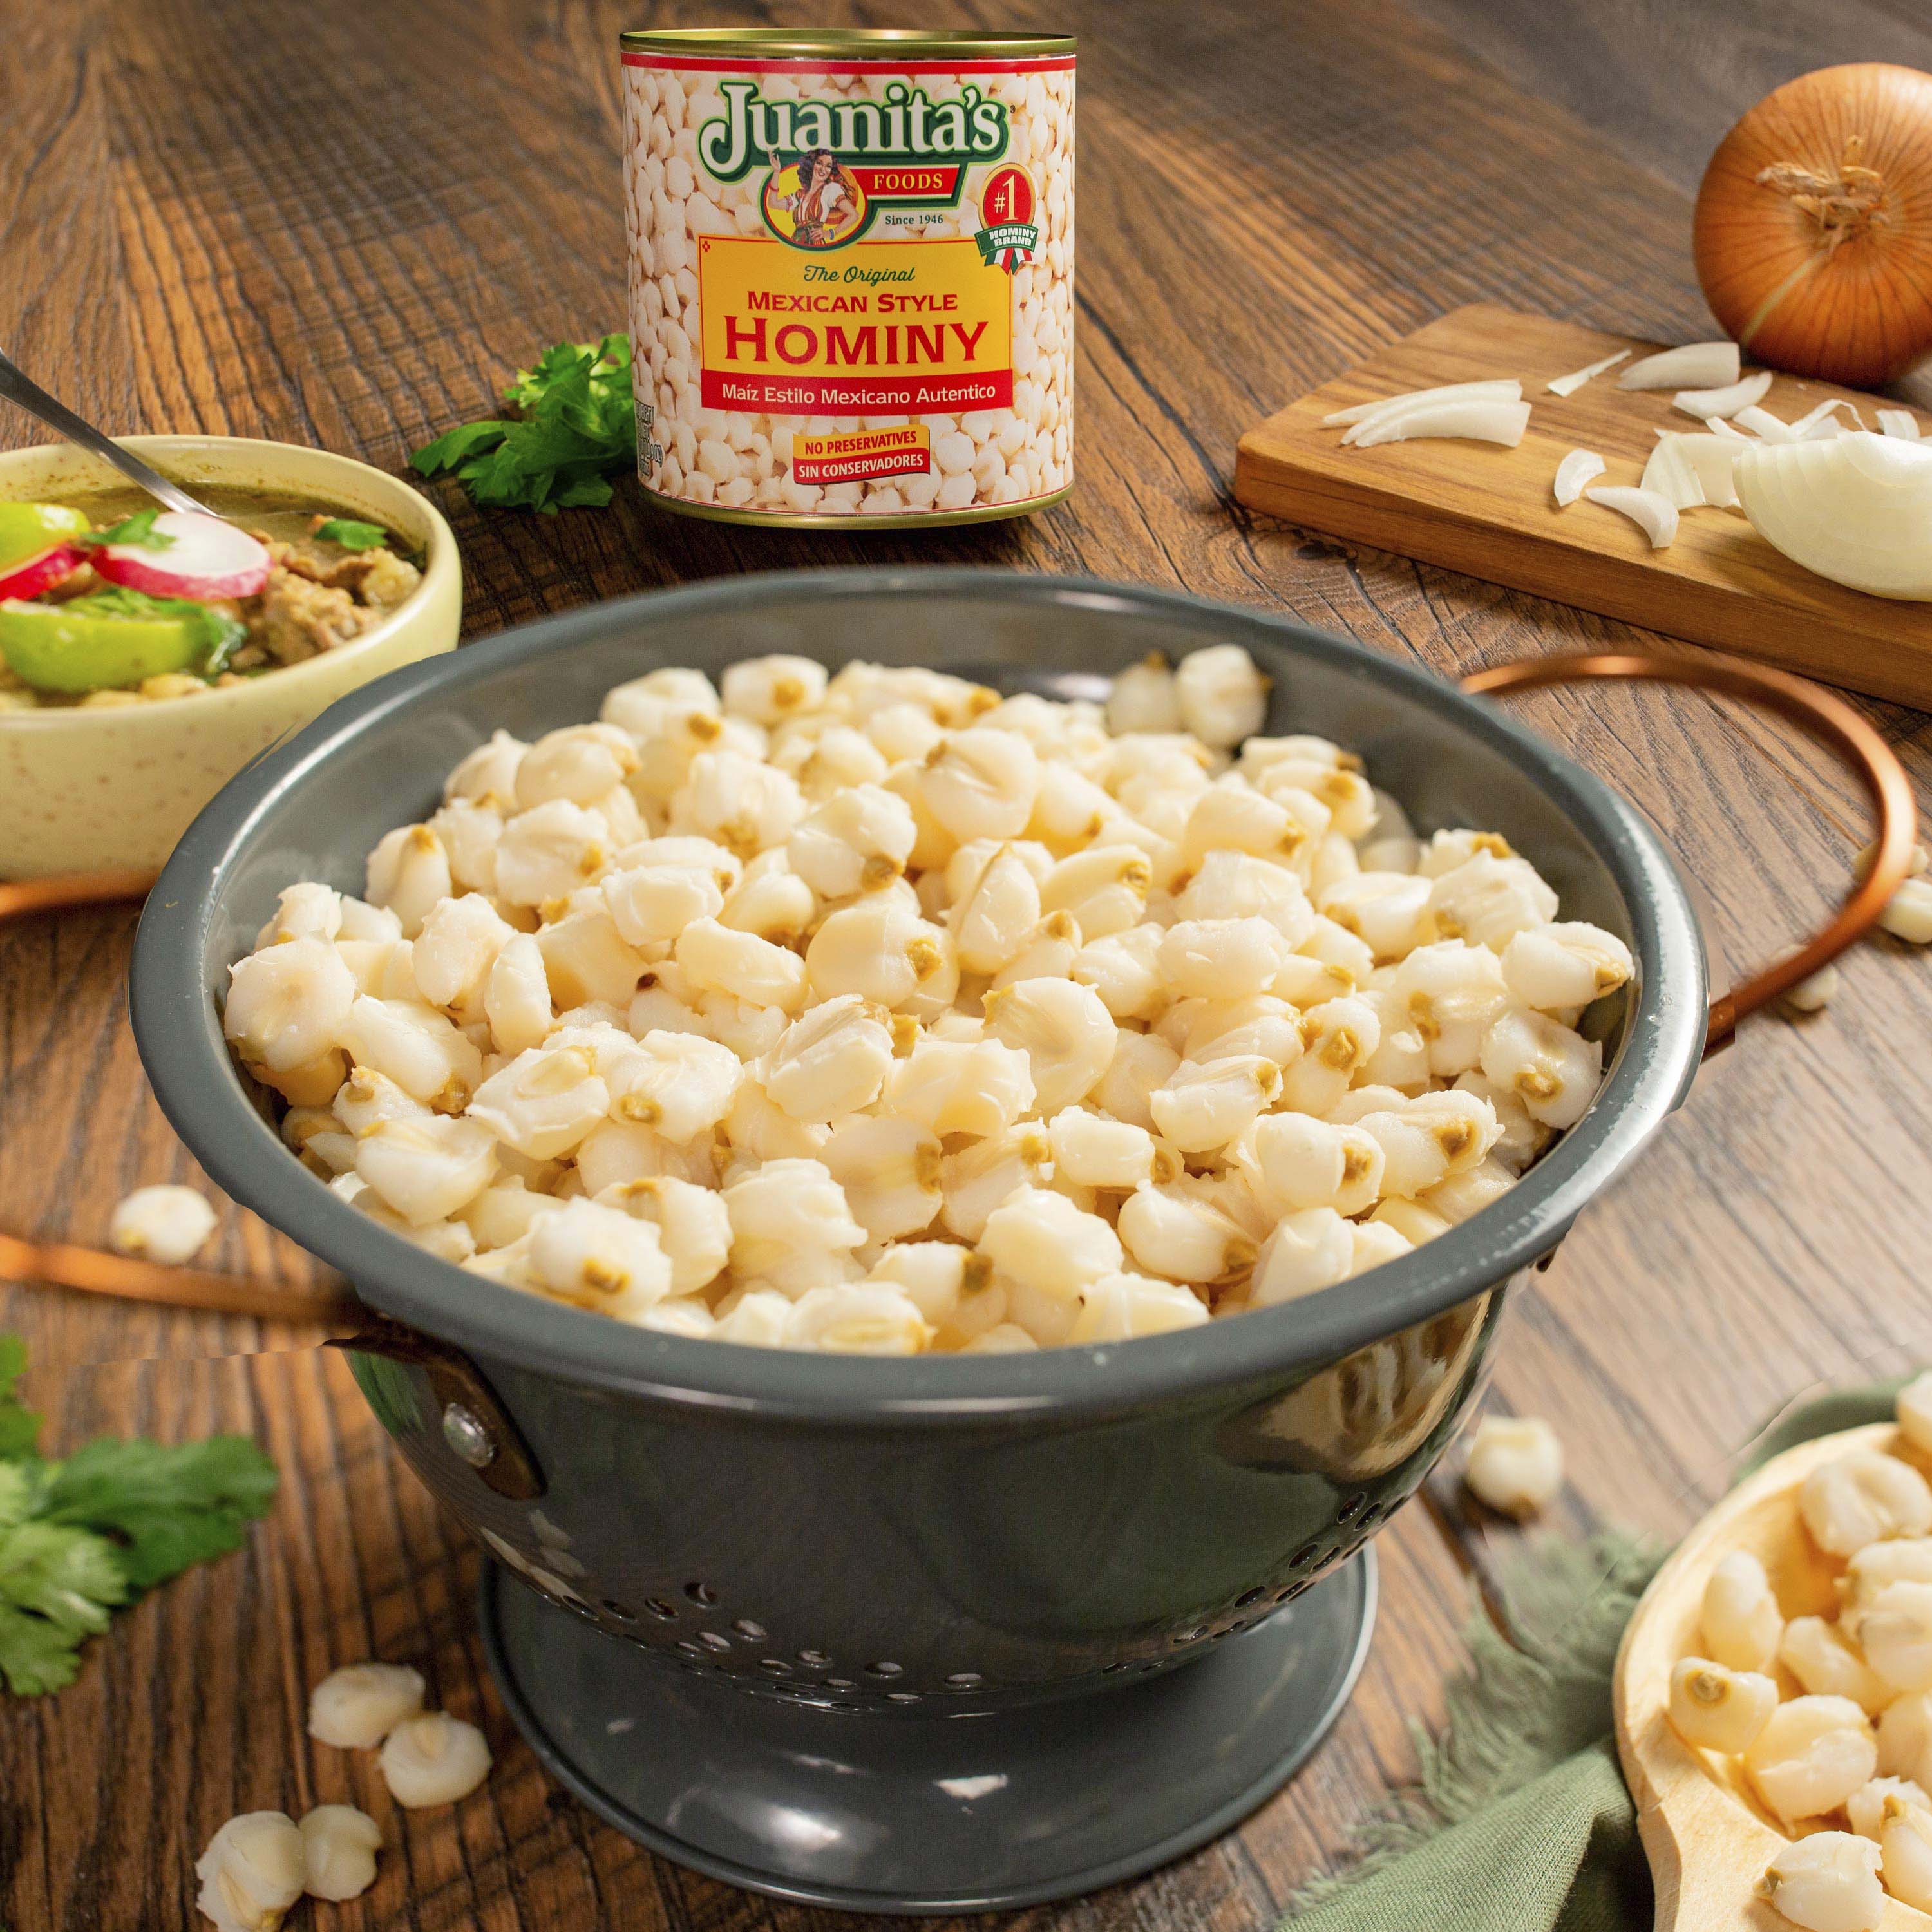 Juanita’s Foods Mexican Style Hominy, 110 oz Can - image 4 of 10